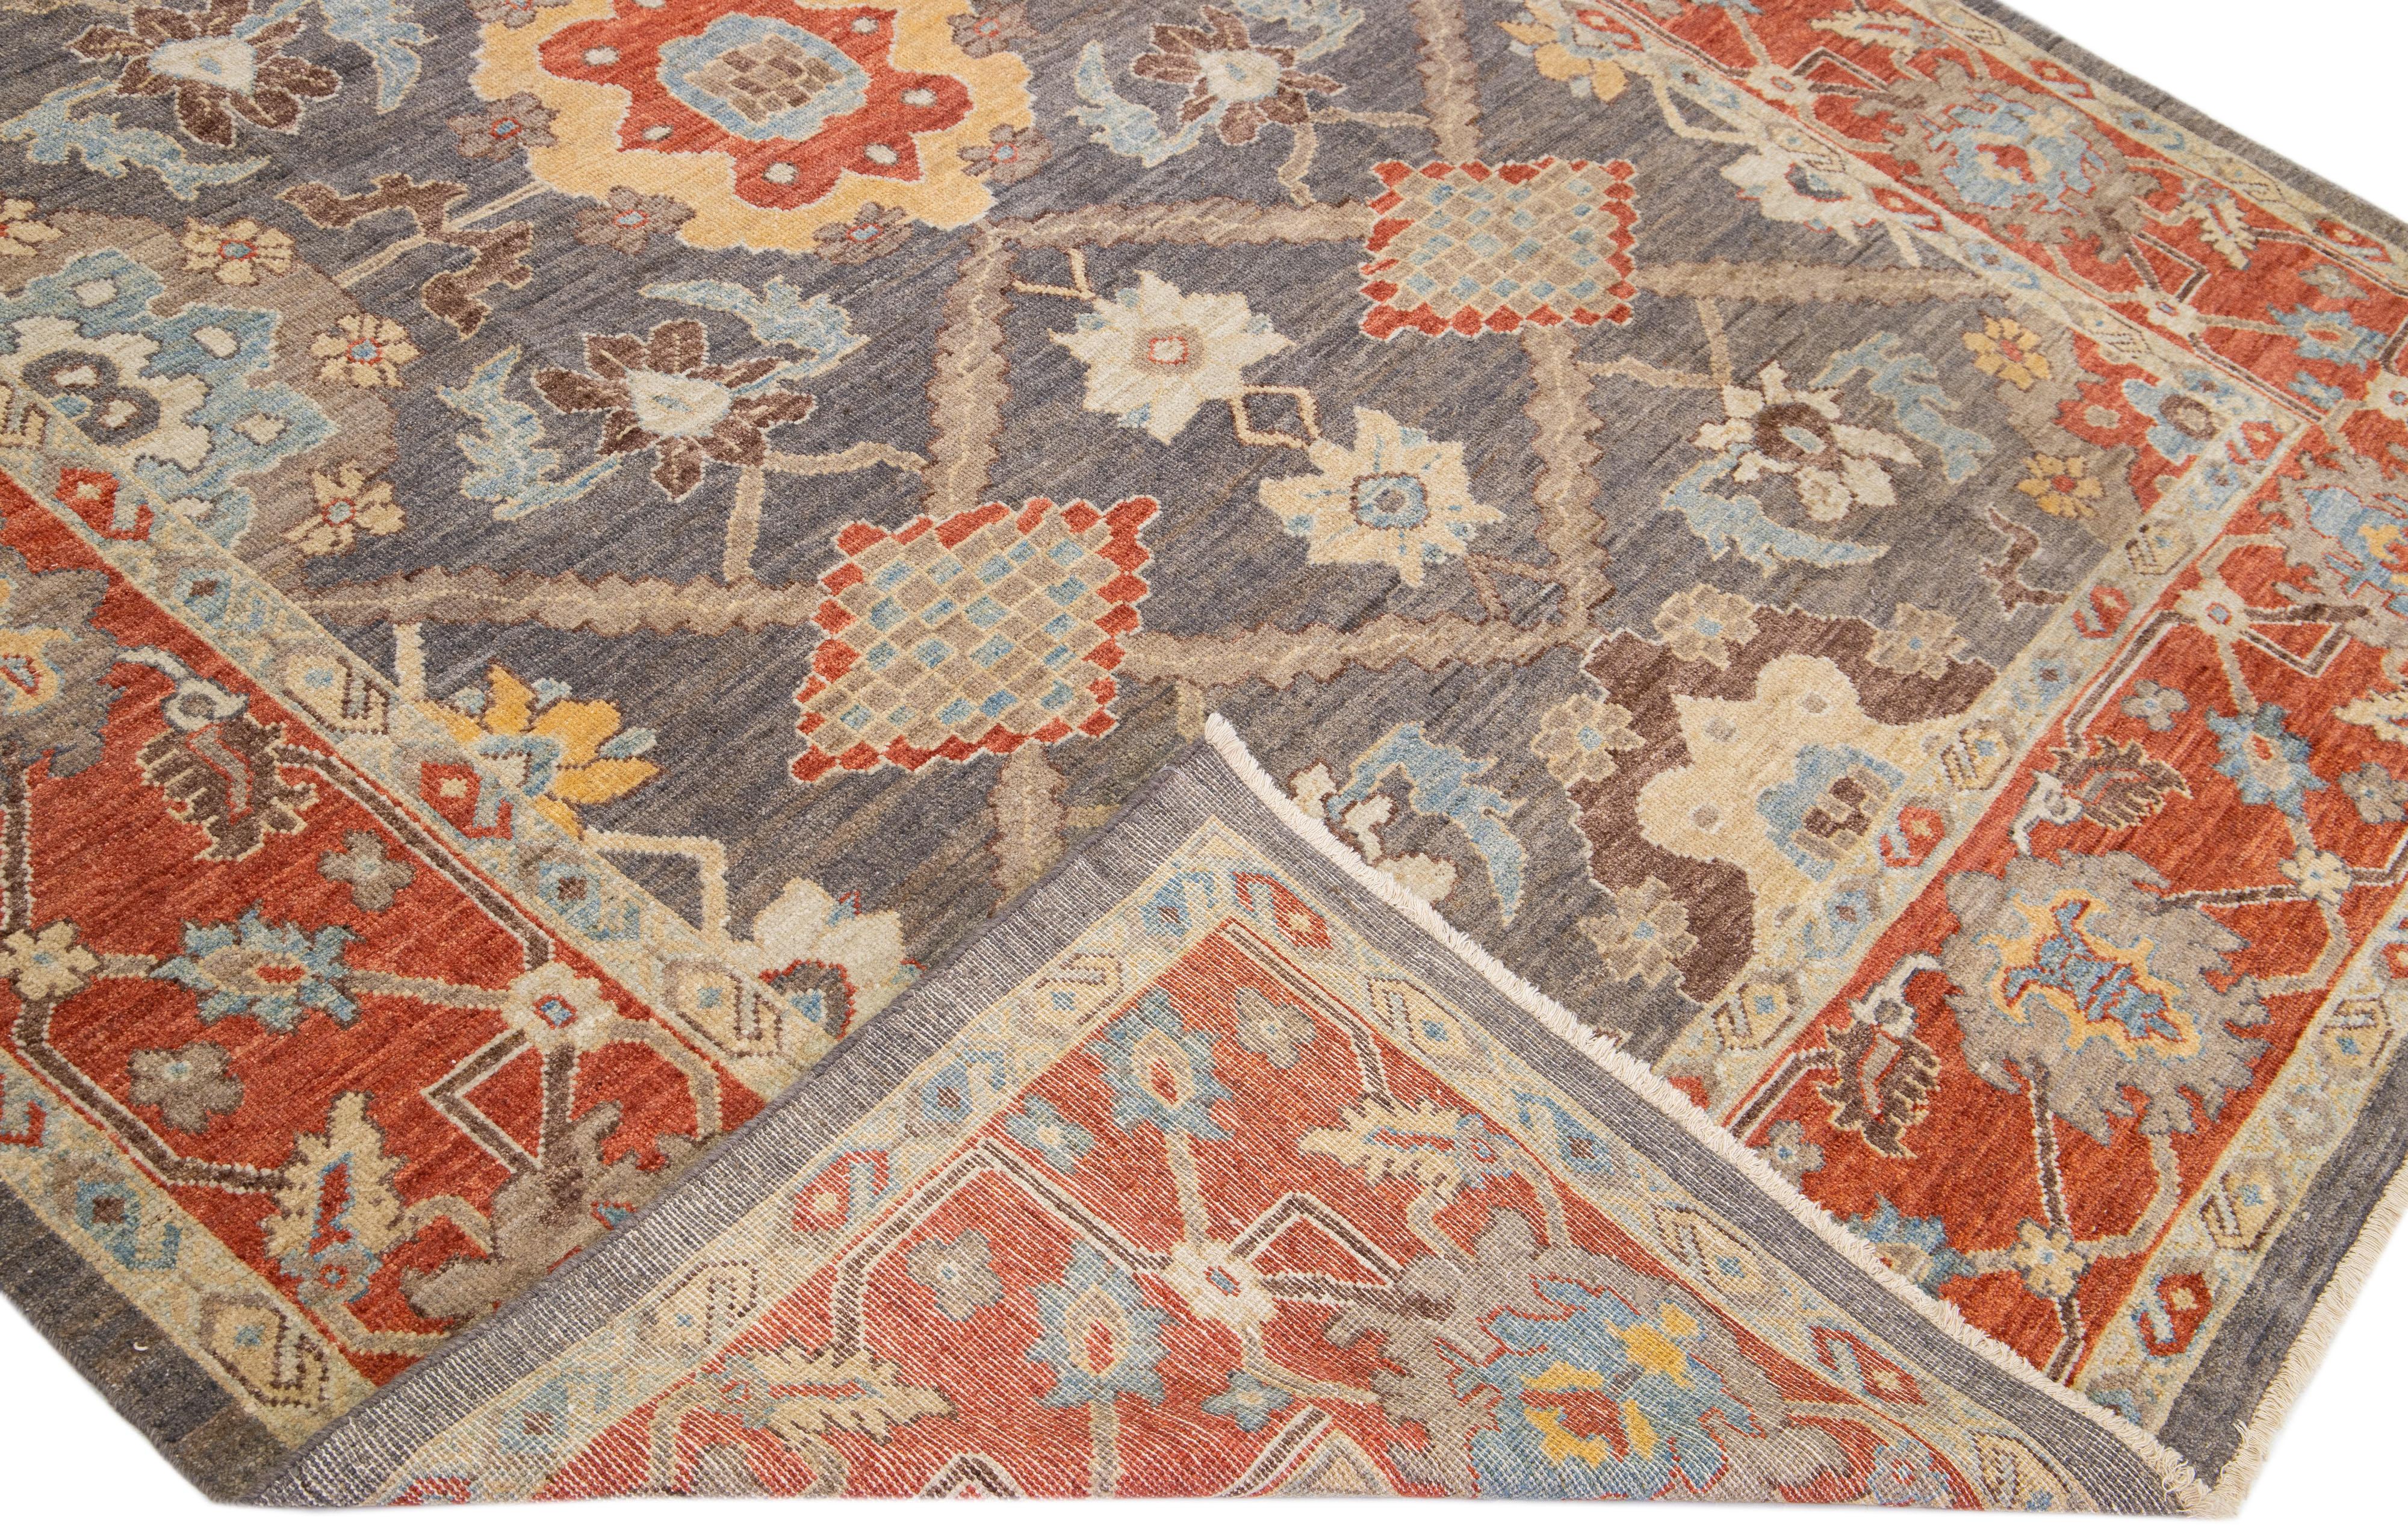 Beautiful modern Sultanabad hand-knotted wool rug with a gray color field. This rug has red, yellow, and blue accents in a gorgeous all-over floral design.

This rug measures: 8'3